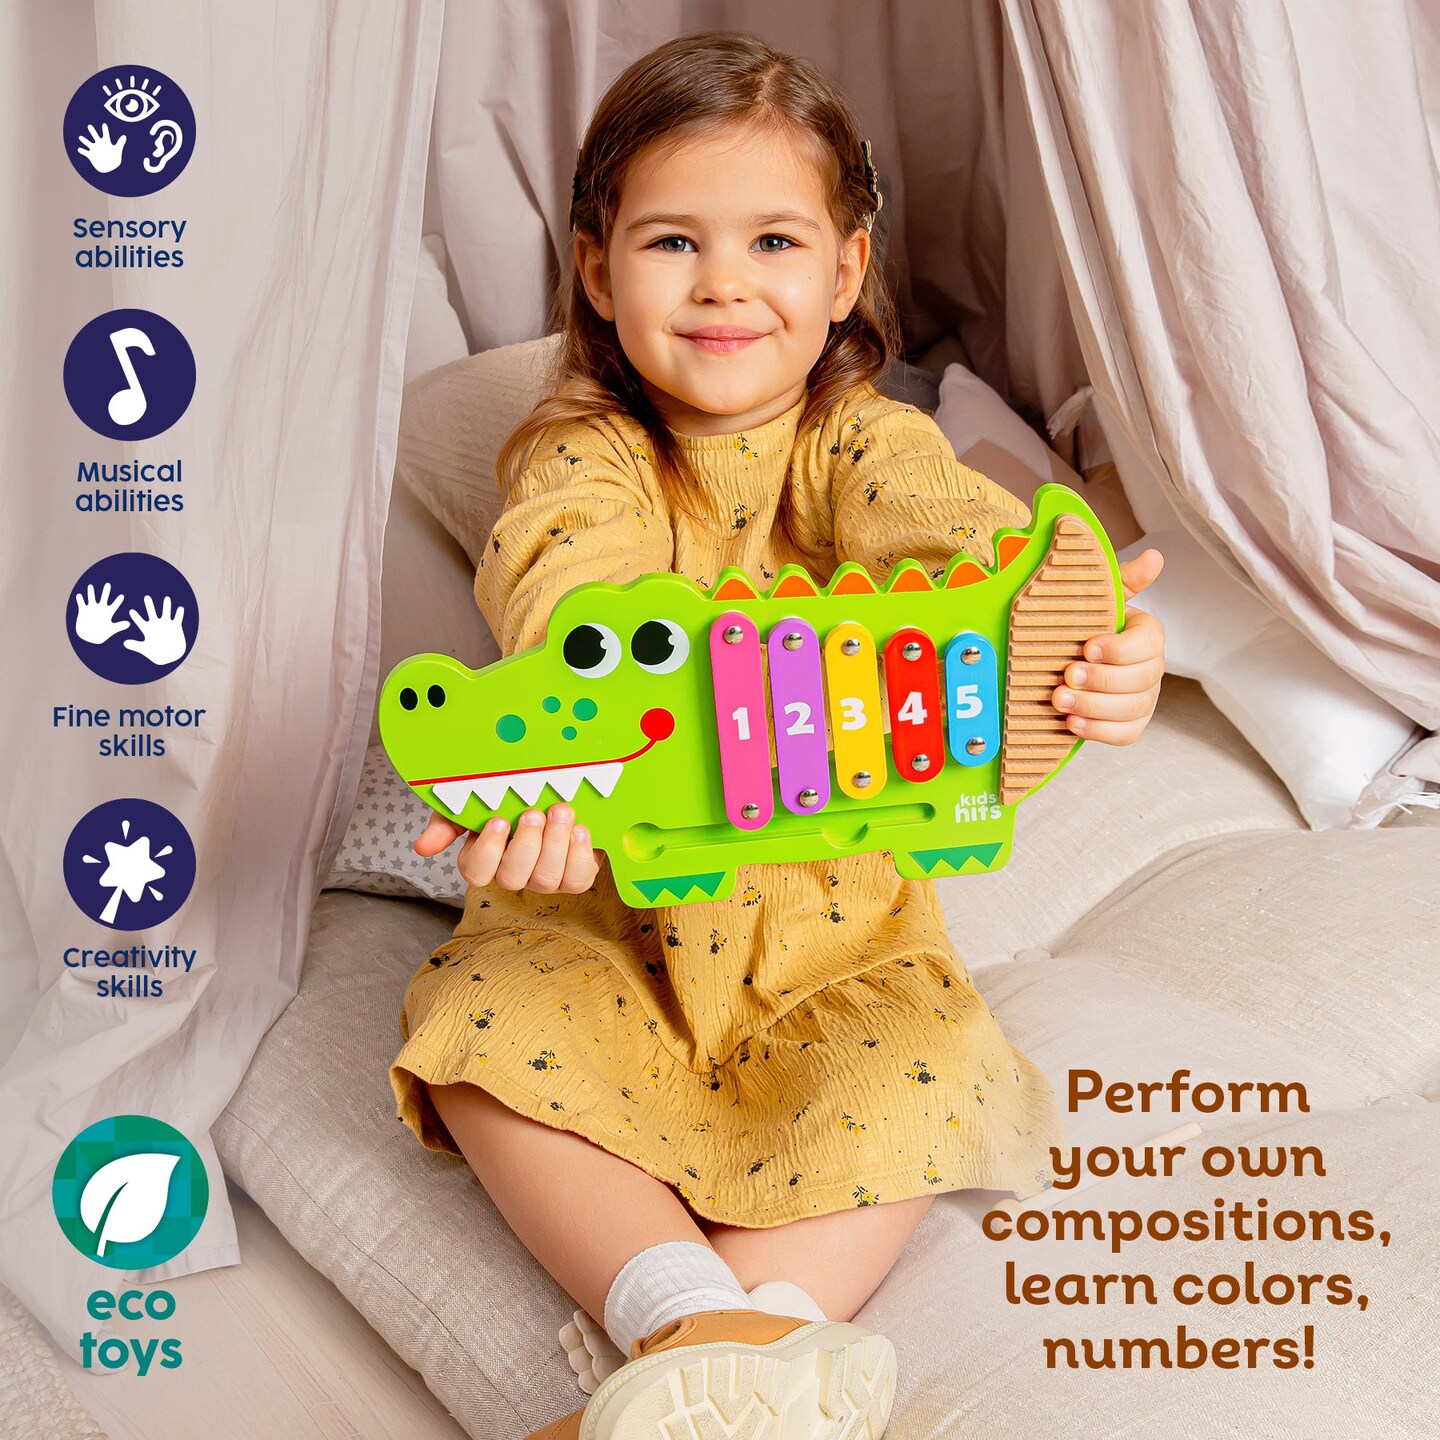 Kids Hits: Harmonize Playtime with the Wooden Croco Xylophone Adventure!